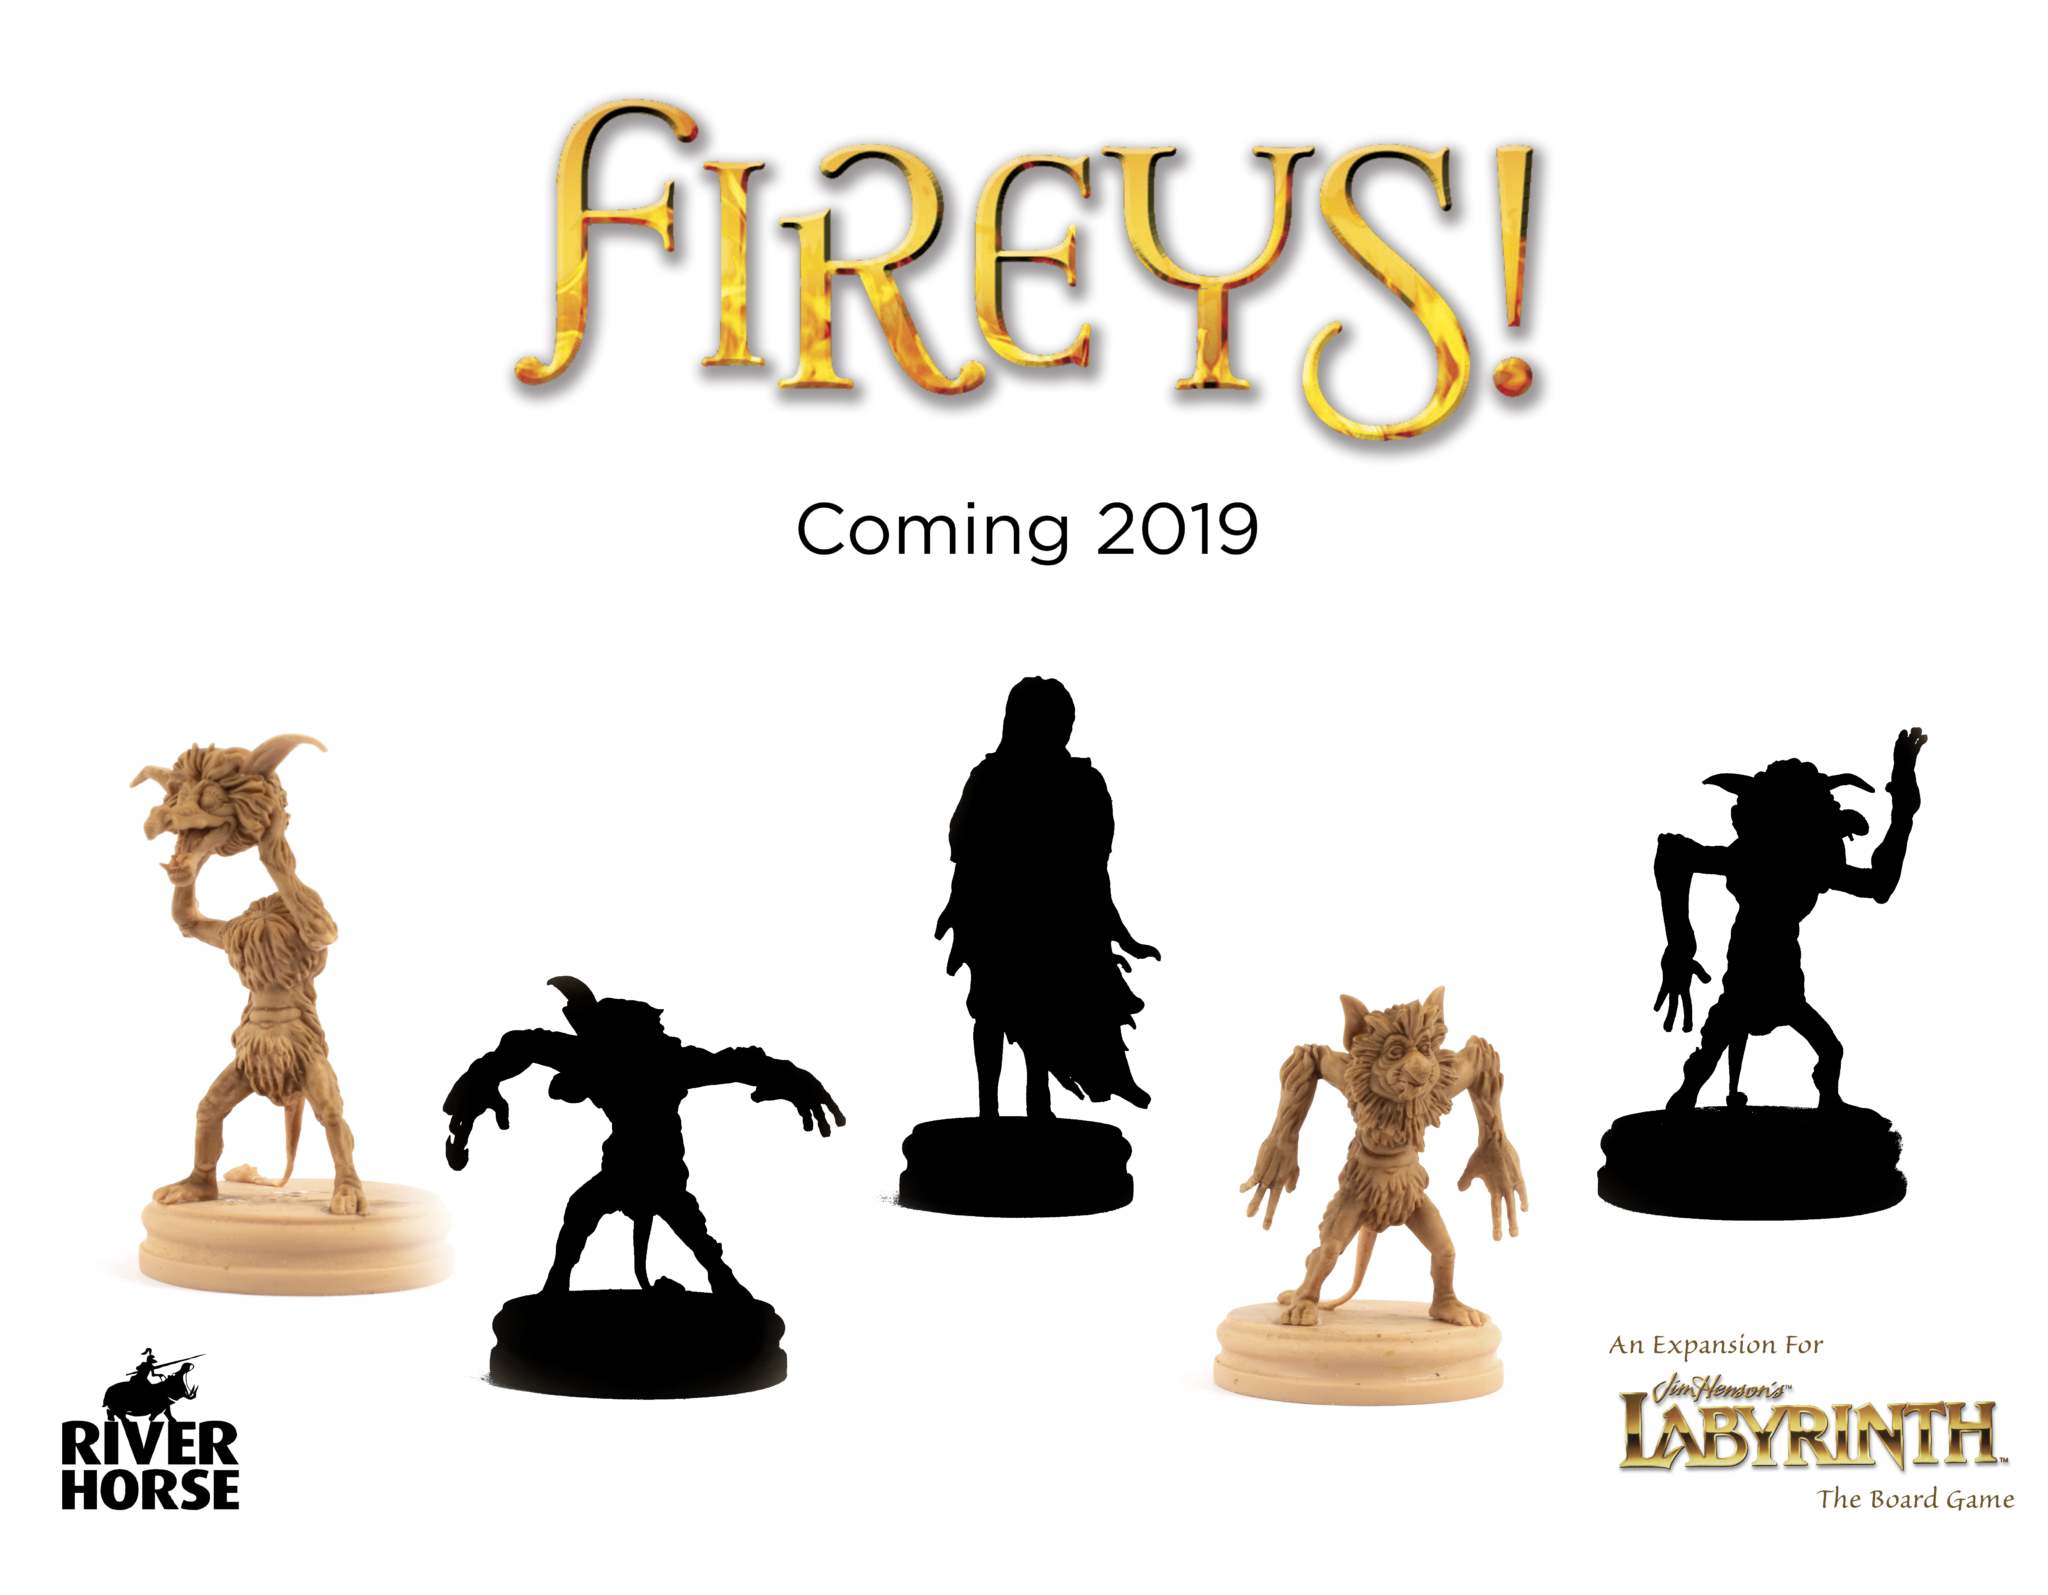 Fireys! expansion for Jim Henson's Labyrinth the Board Game by River Horse